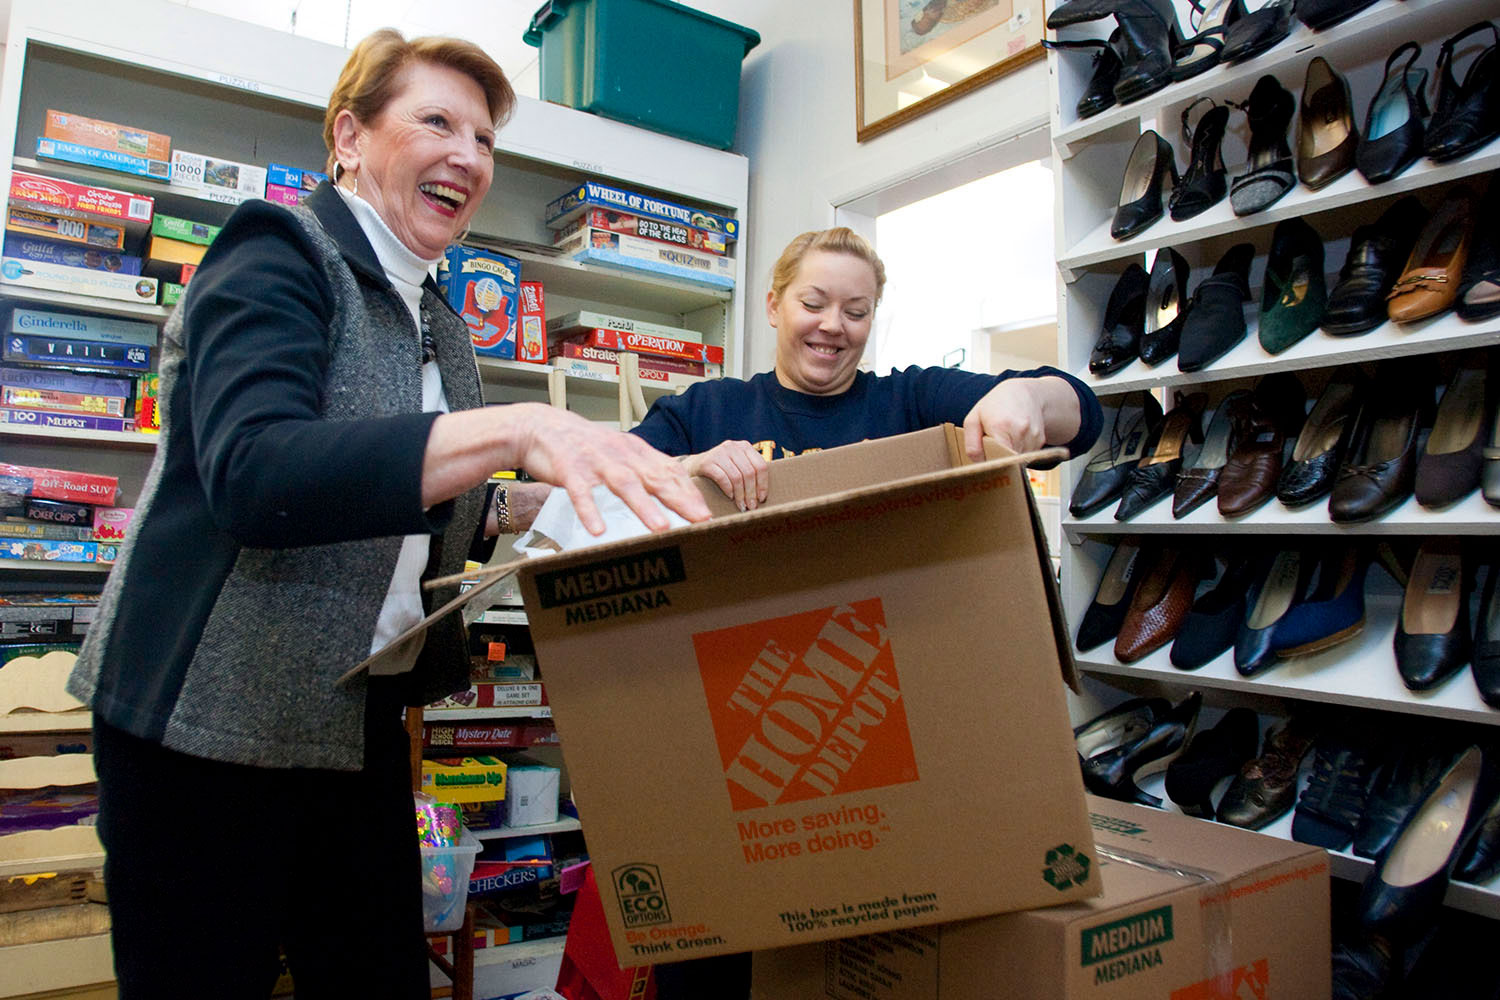 Manager Tillie Thorpe, left, and volunteer Audree Gee unpack donated boxes at the Treasure House.